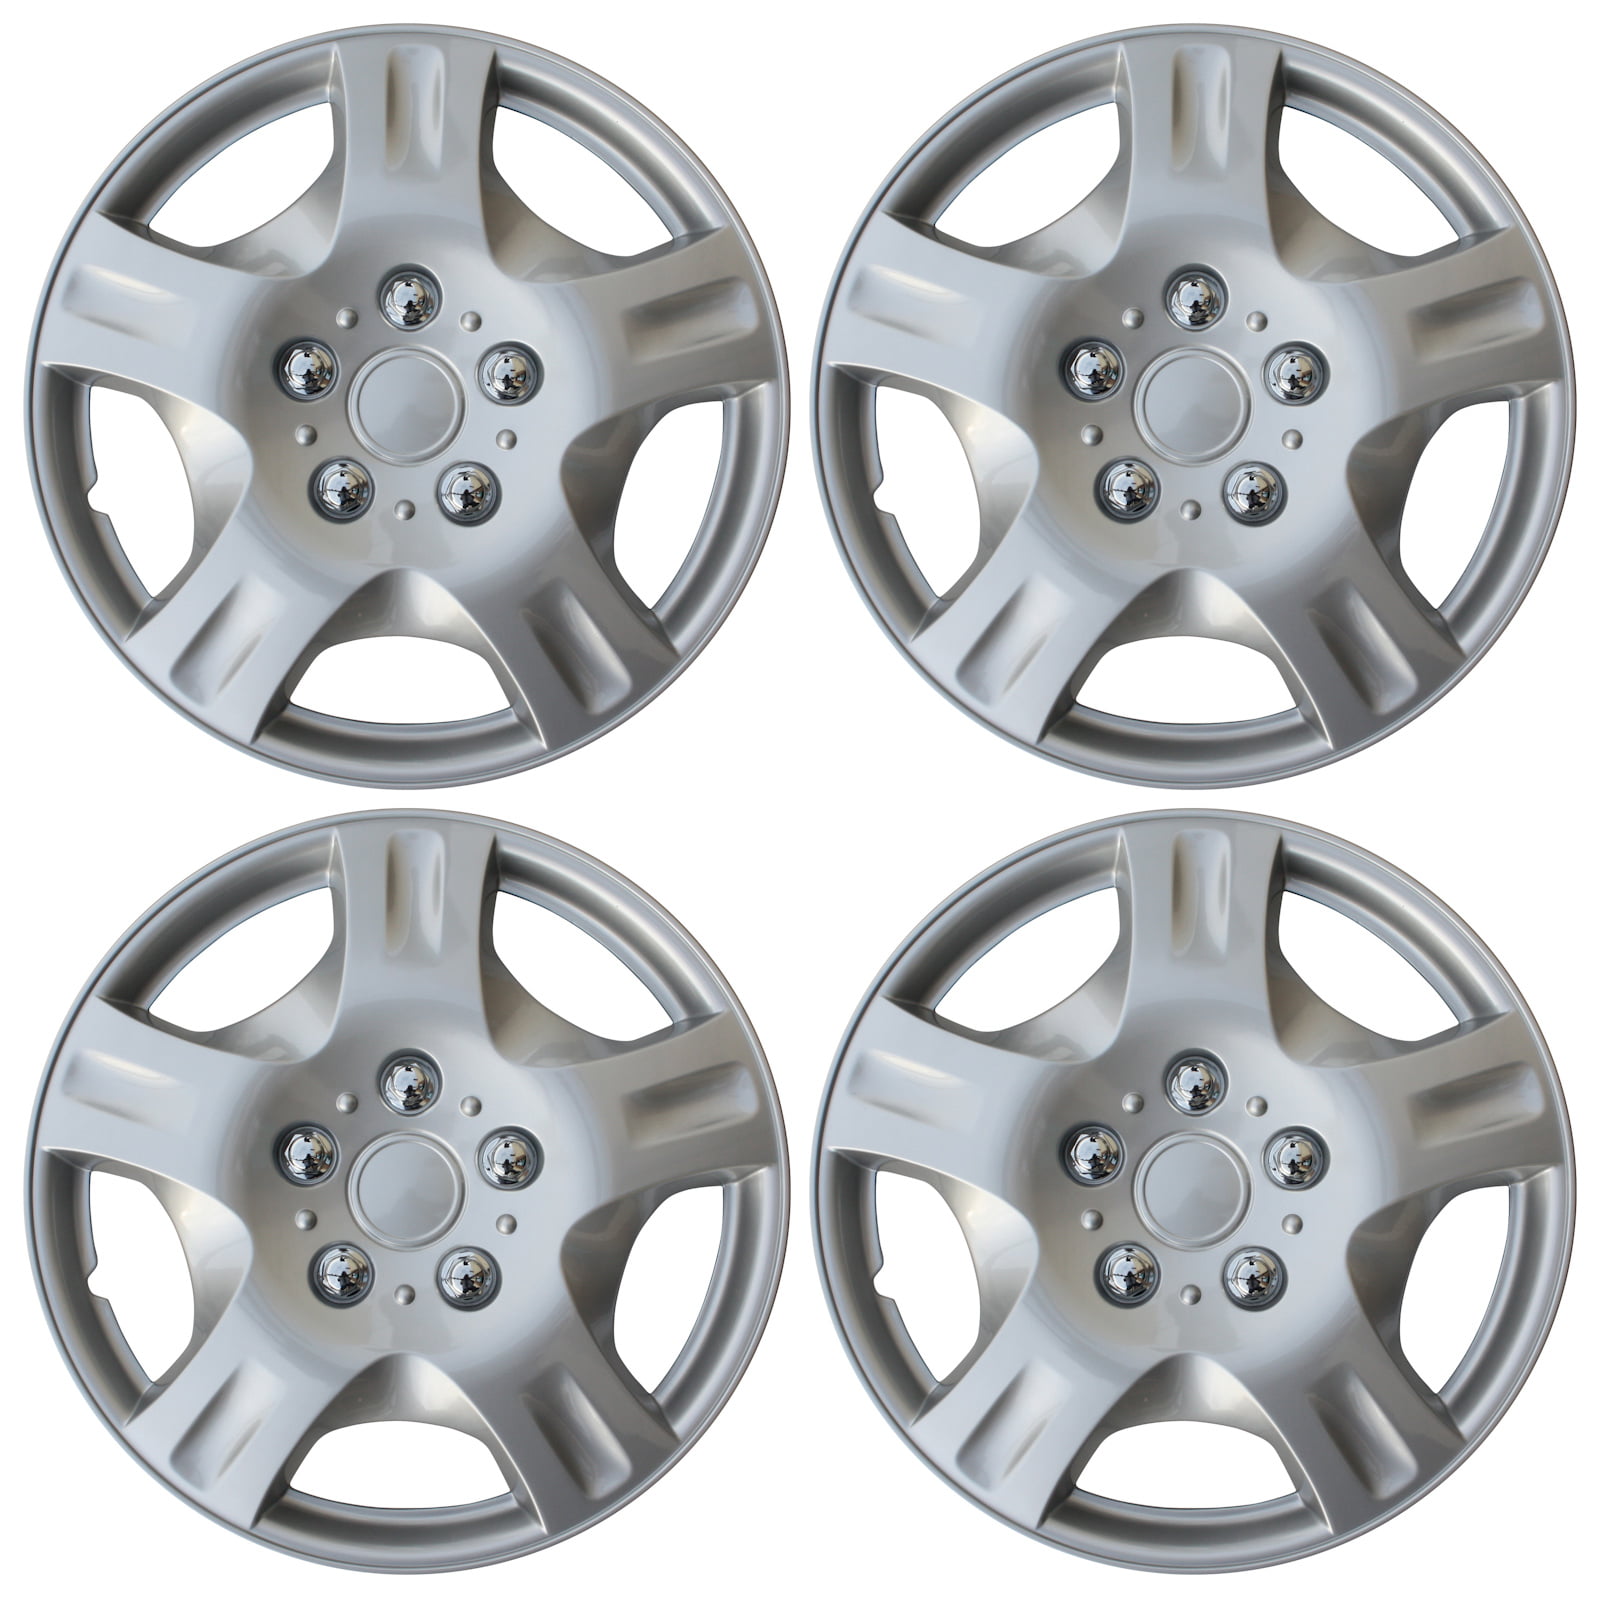 Universal Car Silver Hubcaps w/Chrome Bolt Nuts 15" Inch Wheel Covers Set